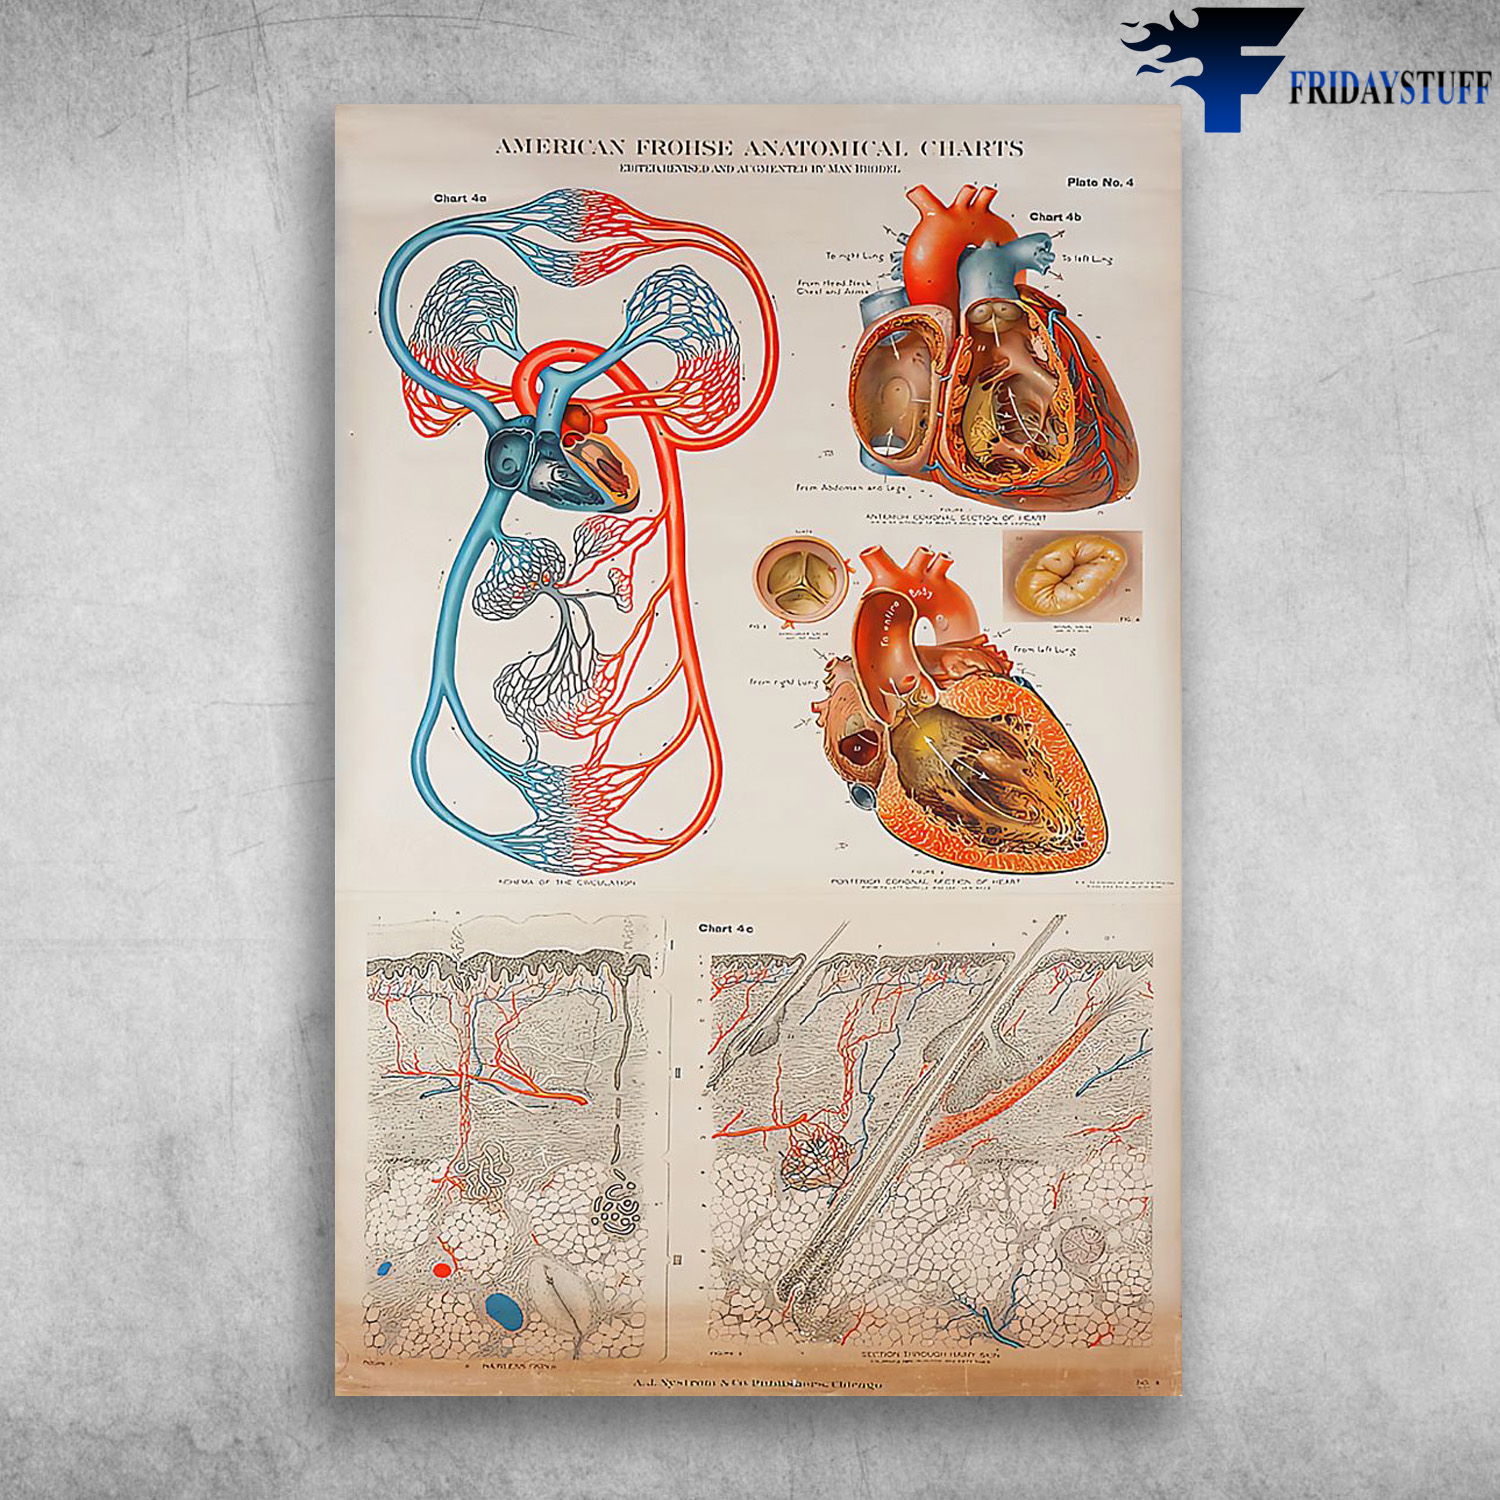 Structure Of The Circulatory System On The Human Body